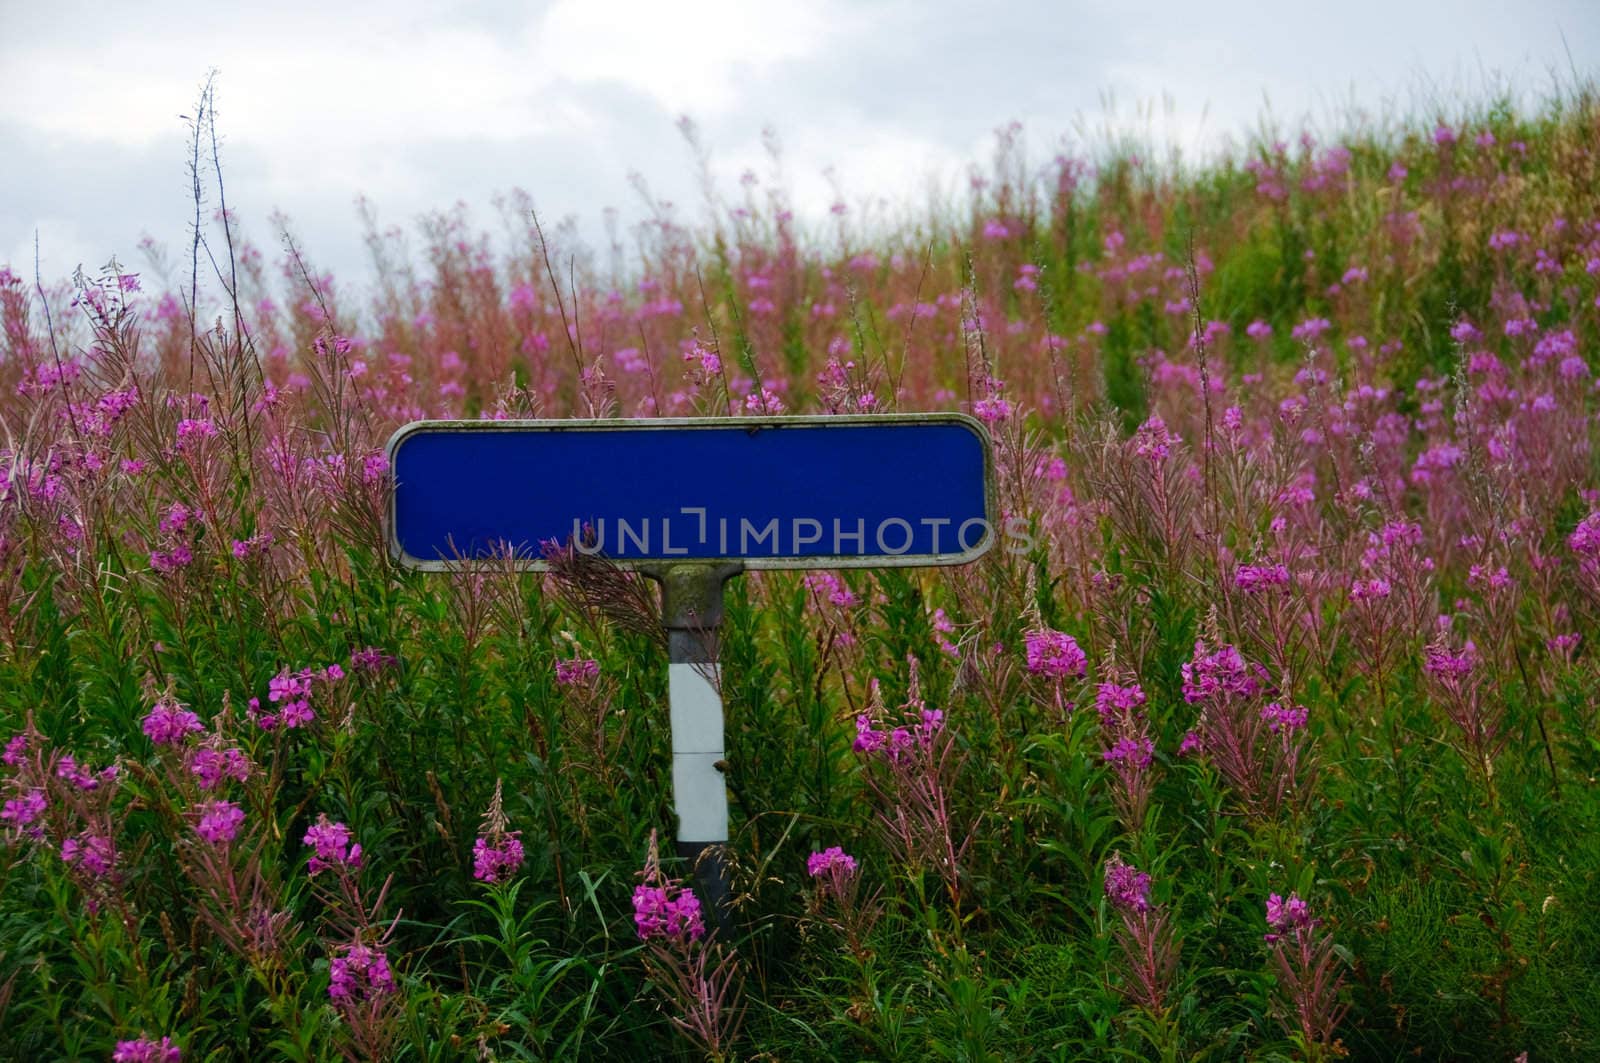 A blank street sign surrounded by pink flowers